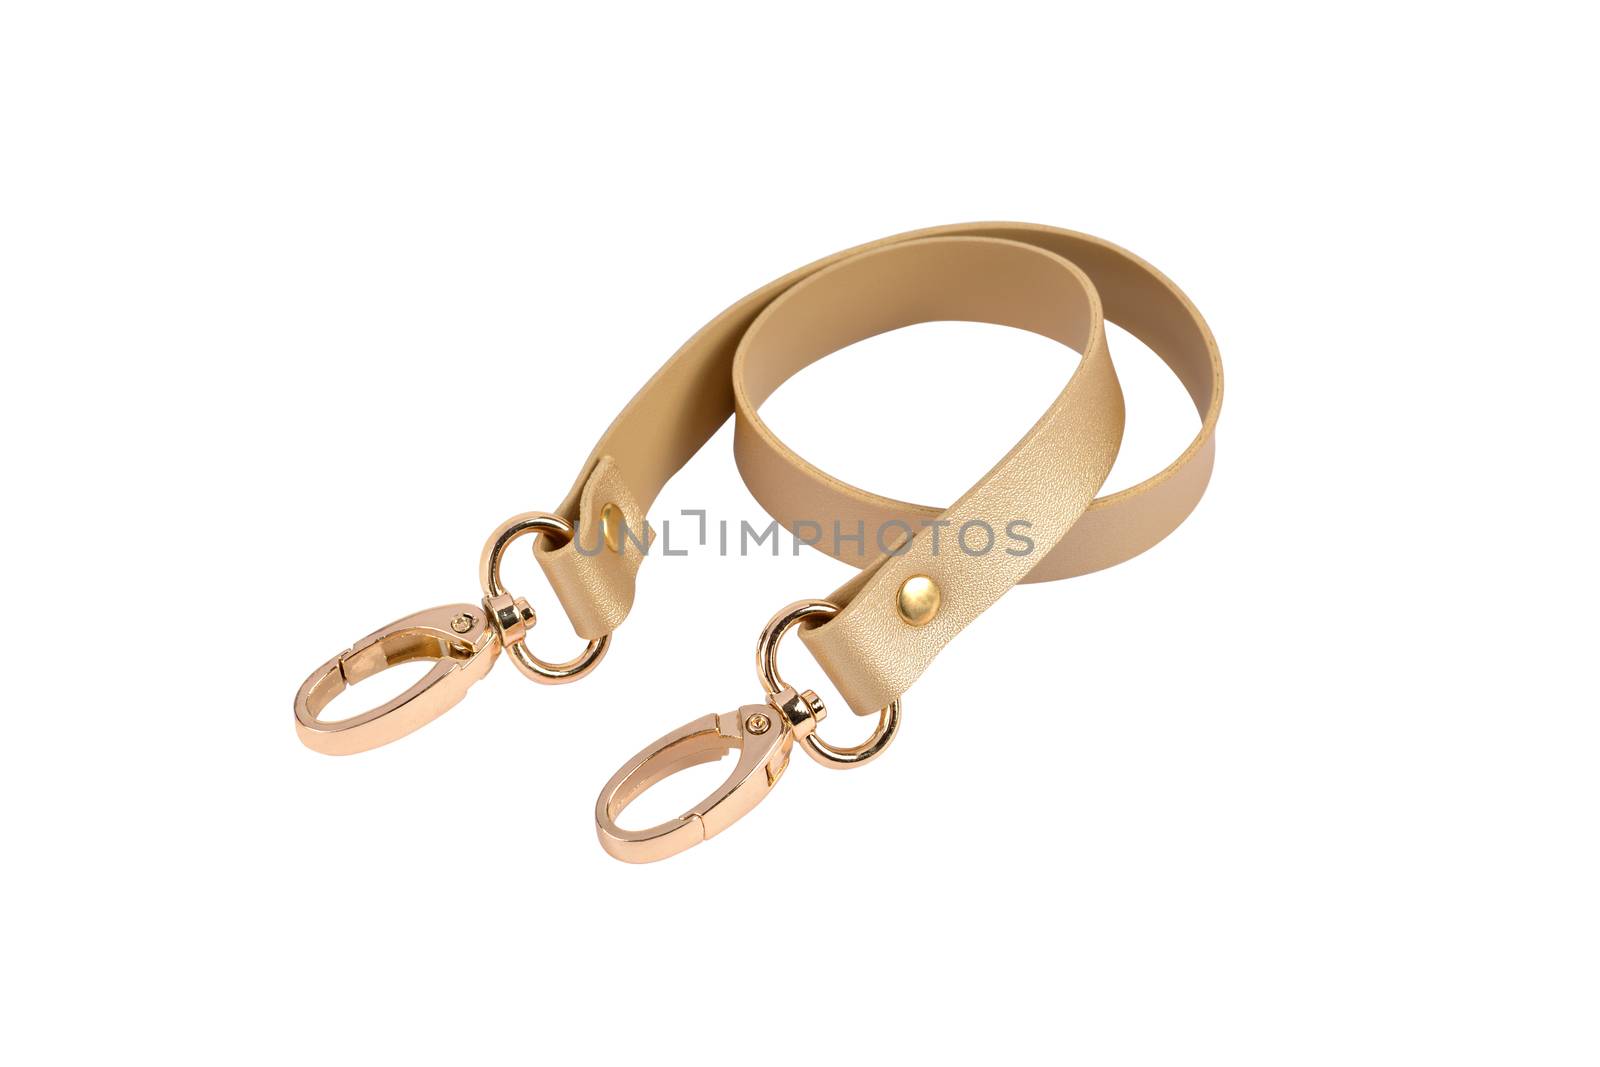 gold leather belt with carbine and metal accessories isolated on white background. use for bags and suitcases